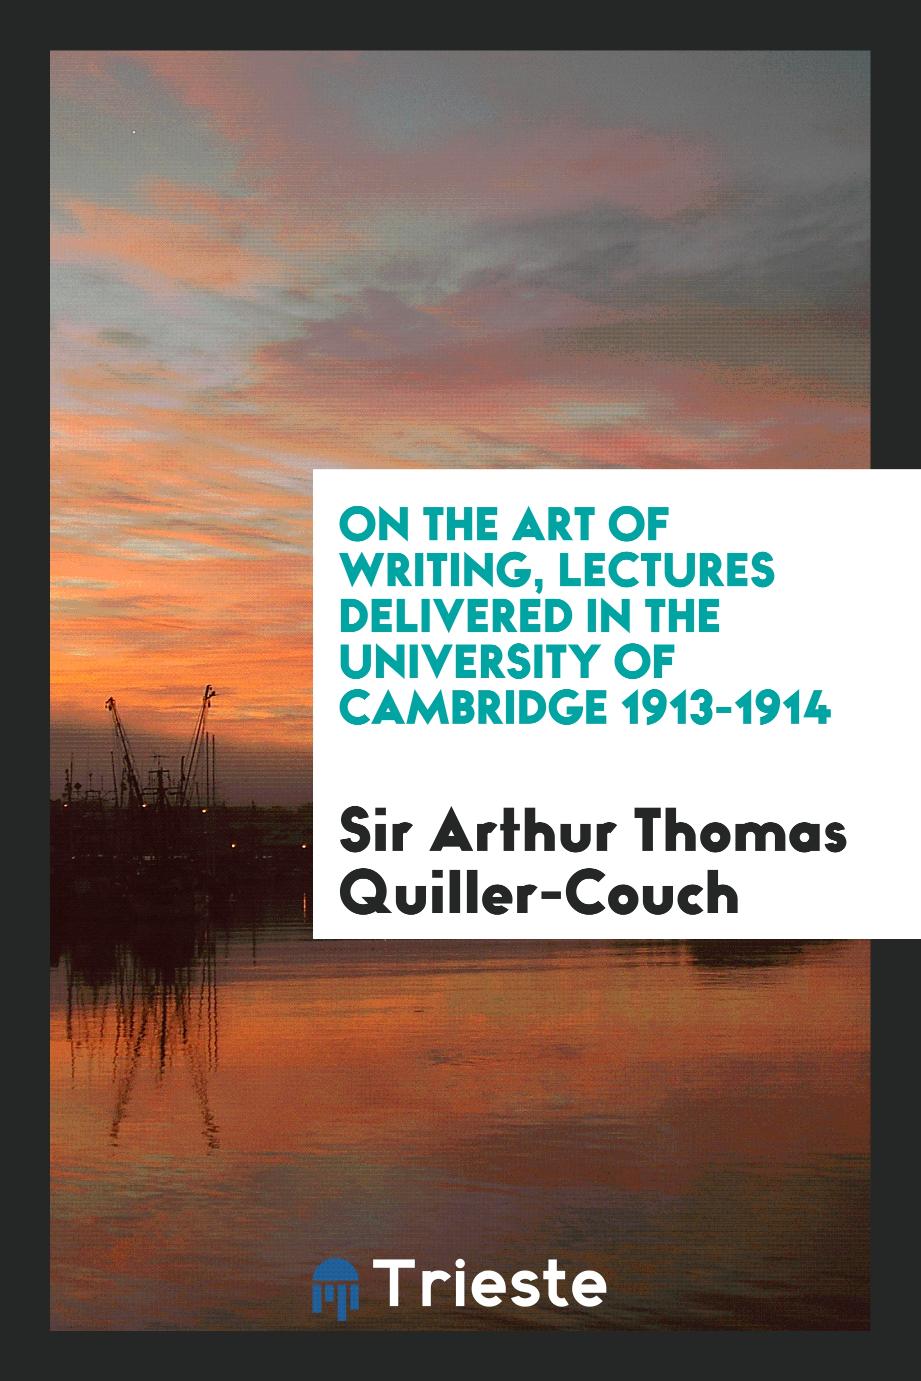 On the art of writing, lectures delivered in the university of Cambridge 1913-1914